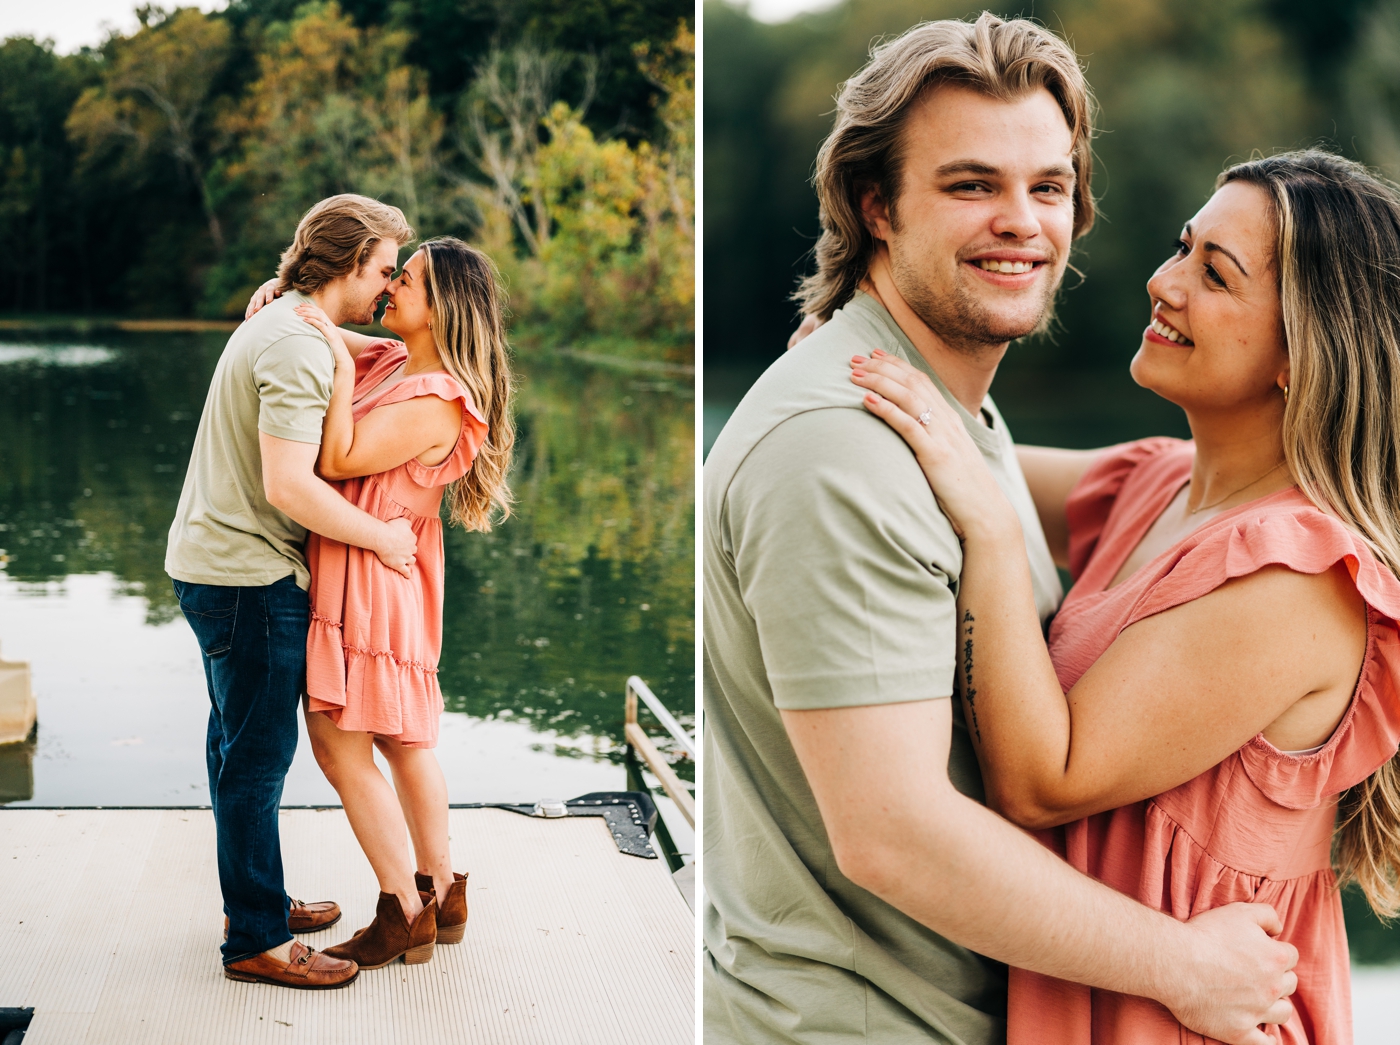 Lakeside engagement session in Indiana